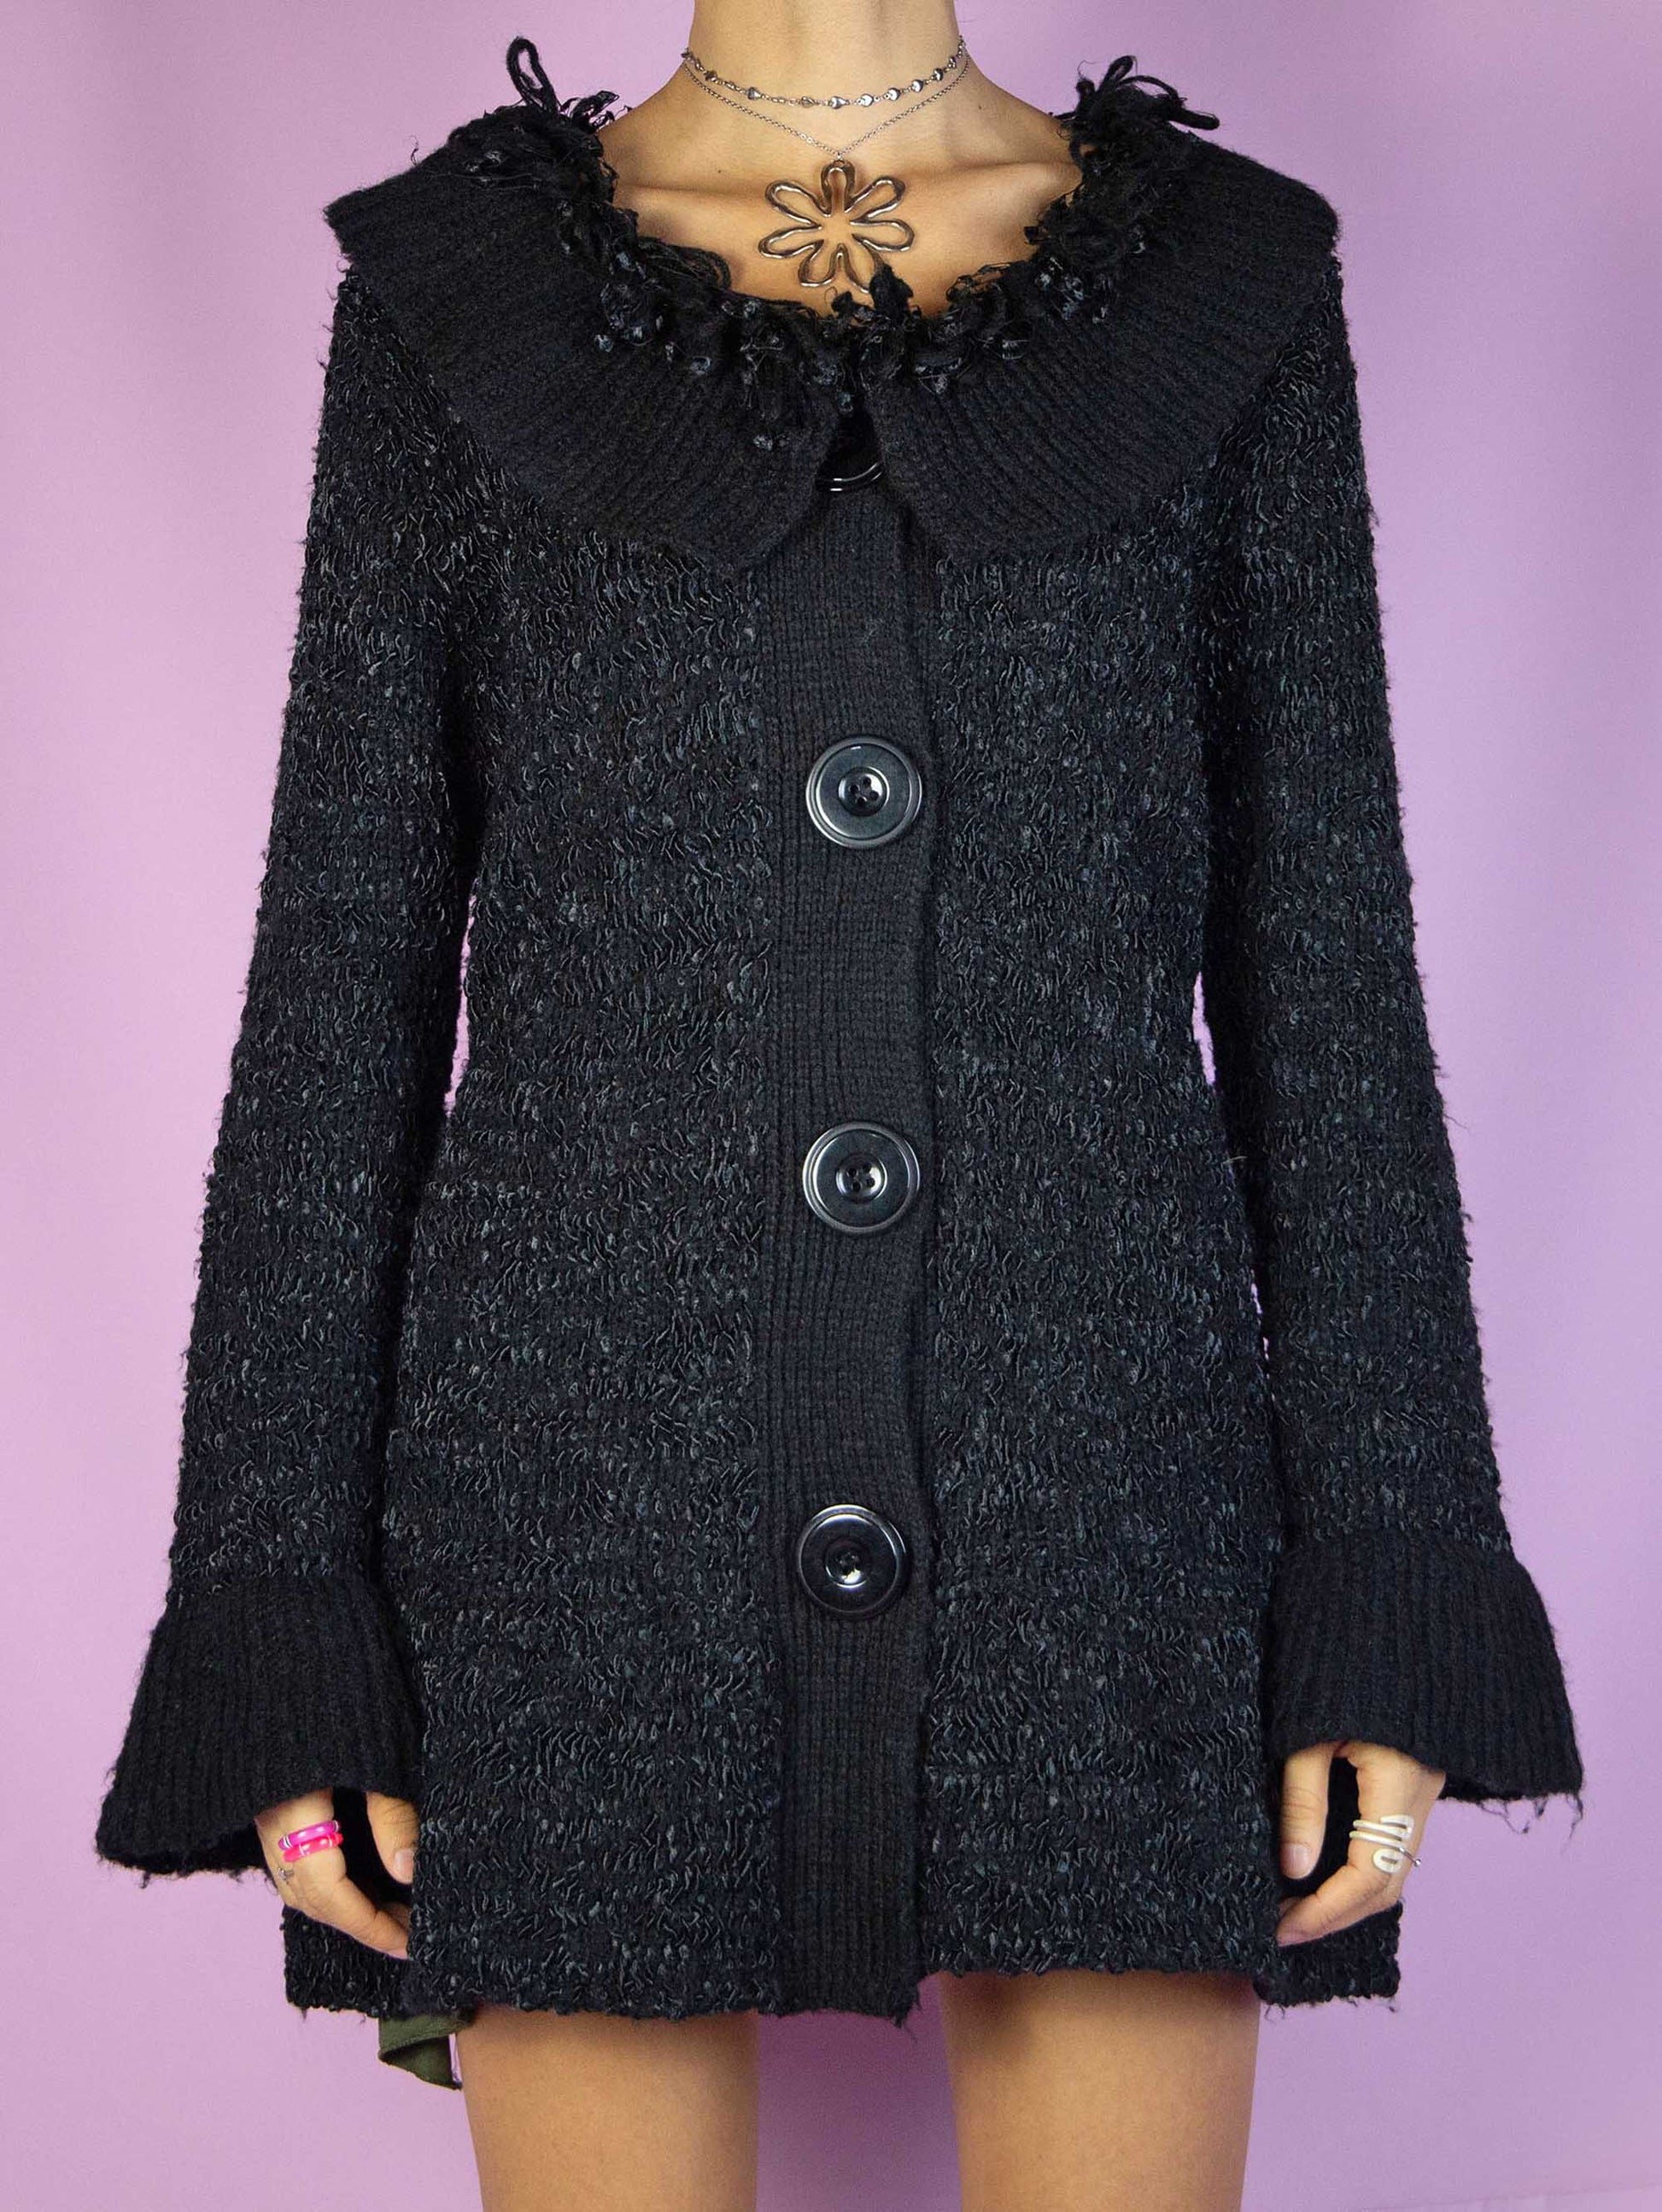 The Y2K Black Knit Cardigan is a vintage 2000s fairy goth inspired winter chunky knit sweater with a flared hem, collar, big buttons, and bell sleeves.